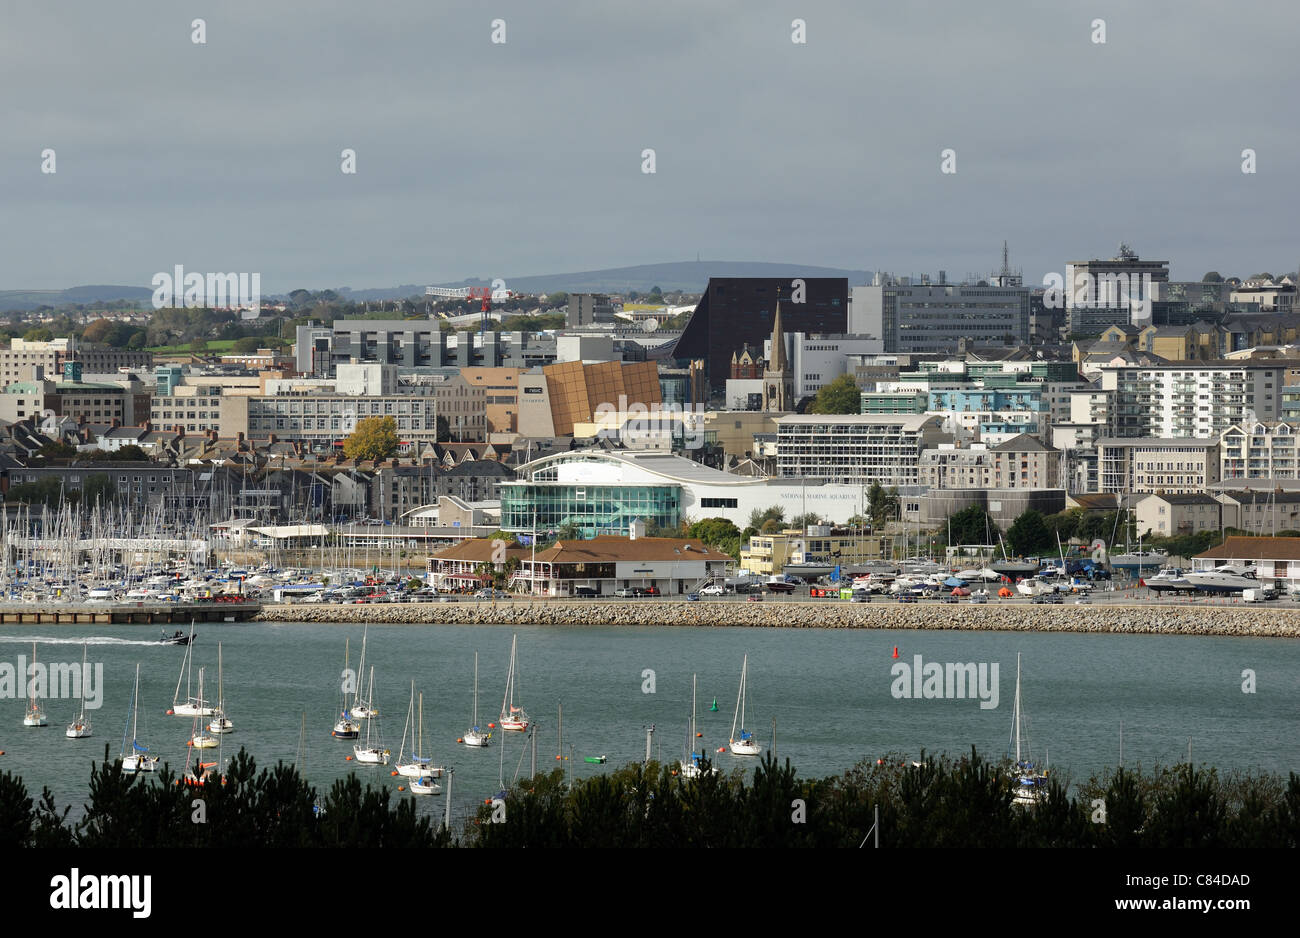 Plymouth city centre and waterfront area Plymouth Devon England UK Stock Photo